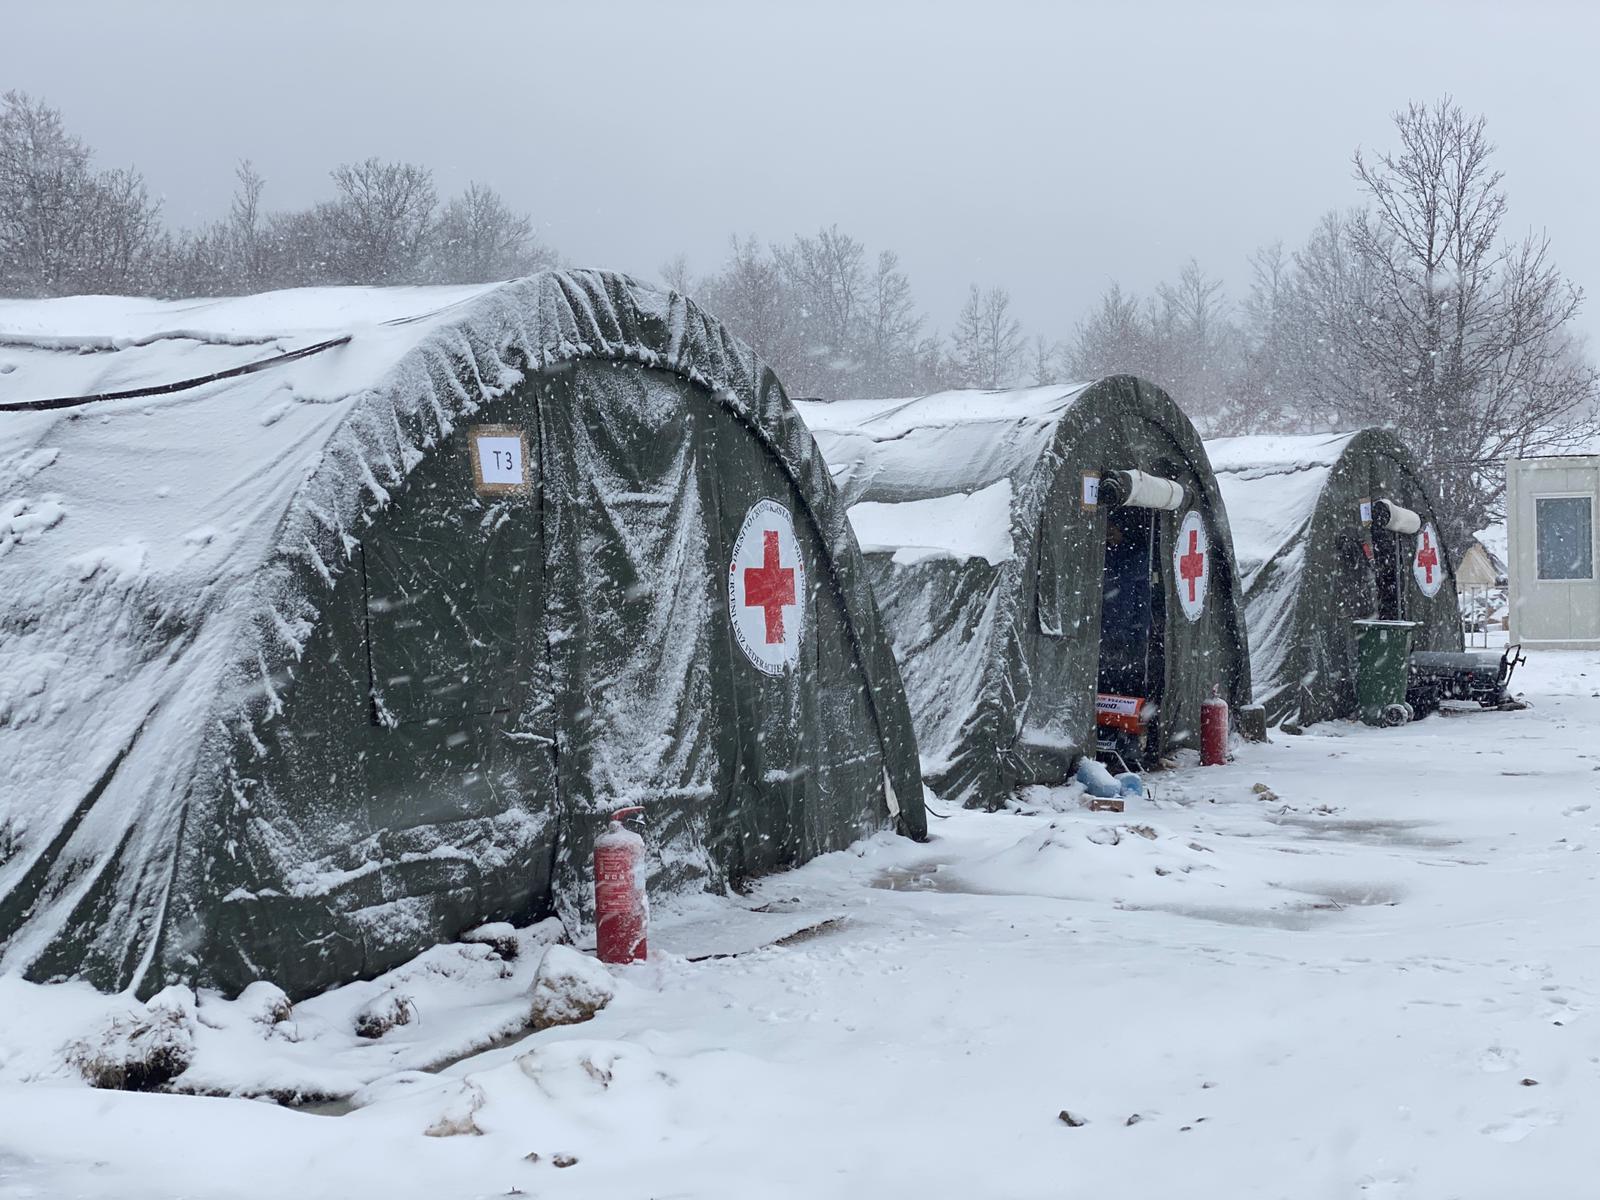 Military tents in the "Lipa" camp - Avaz